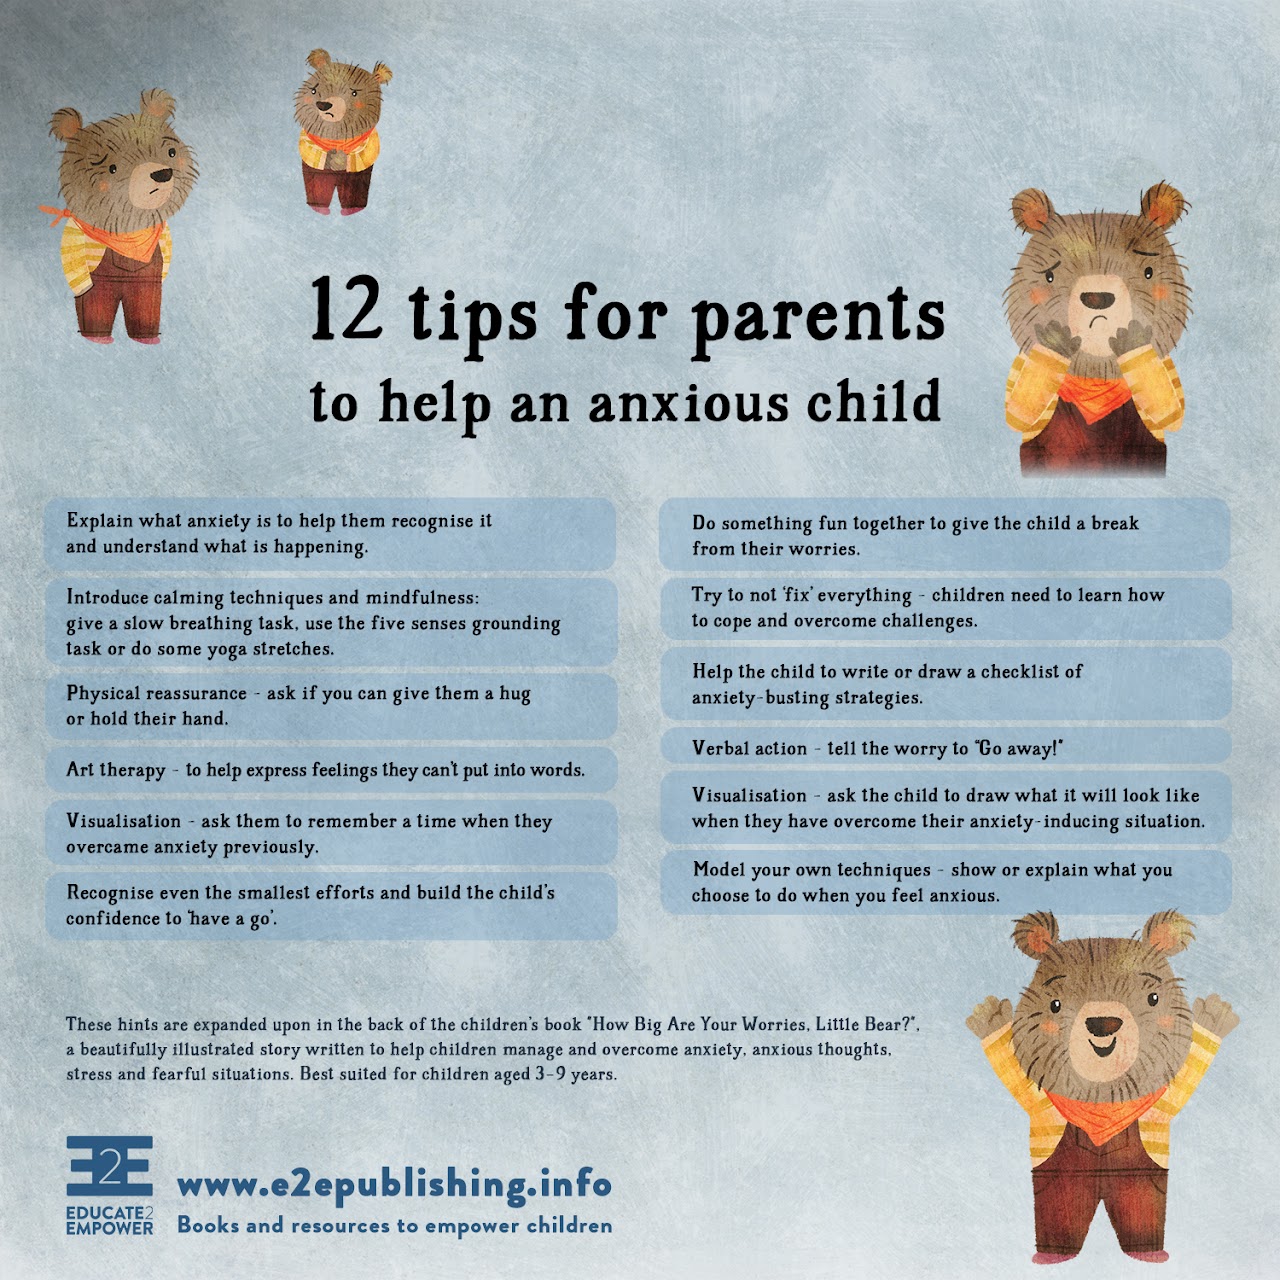 12 tips for parents with anxious children cover